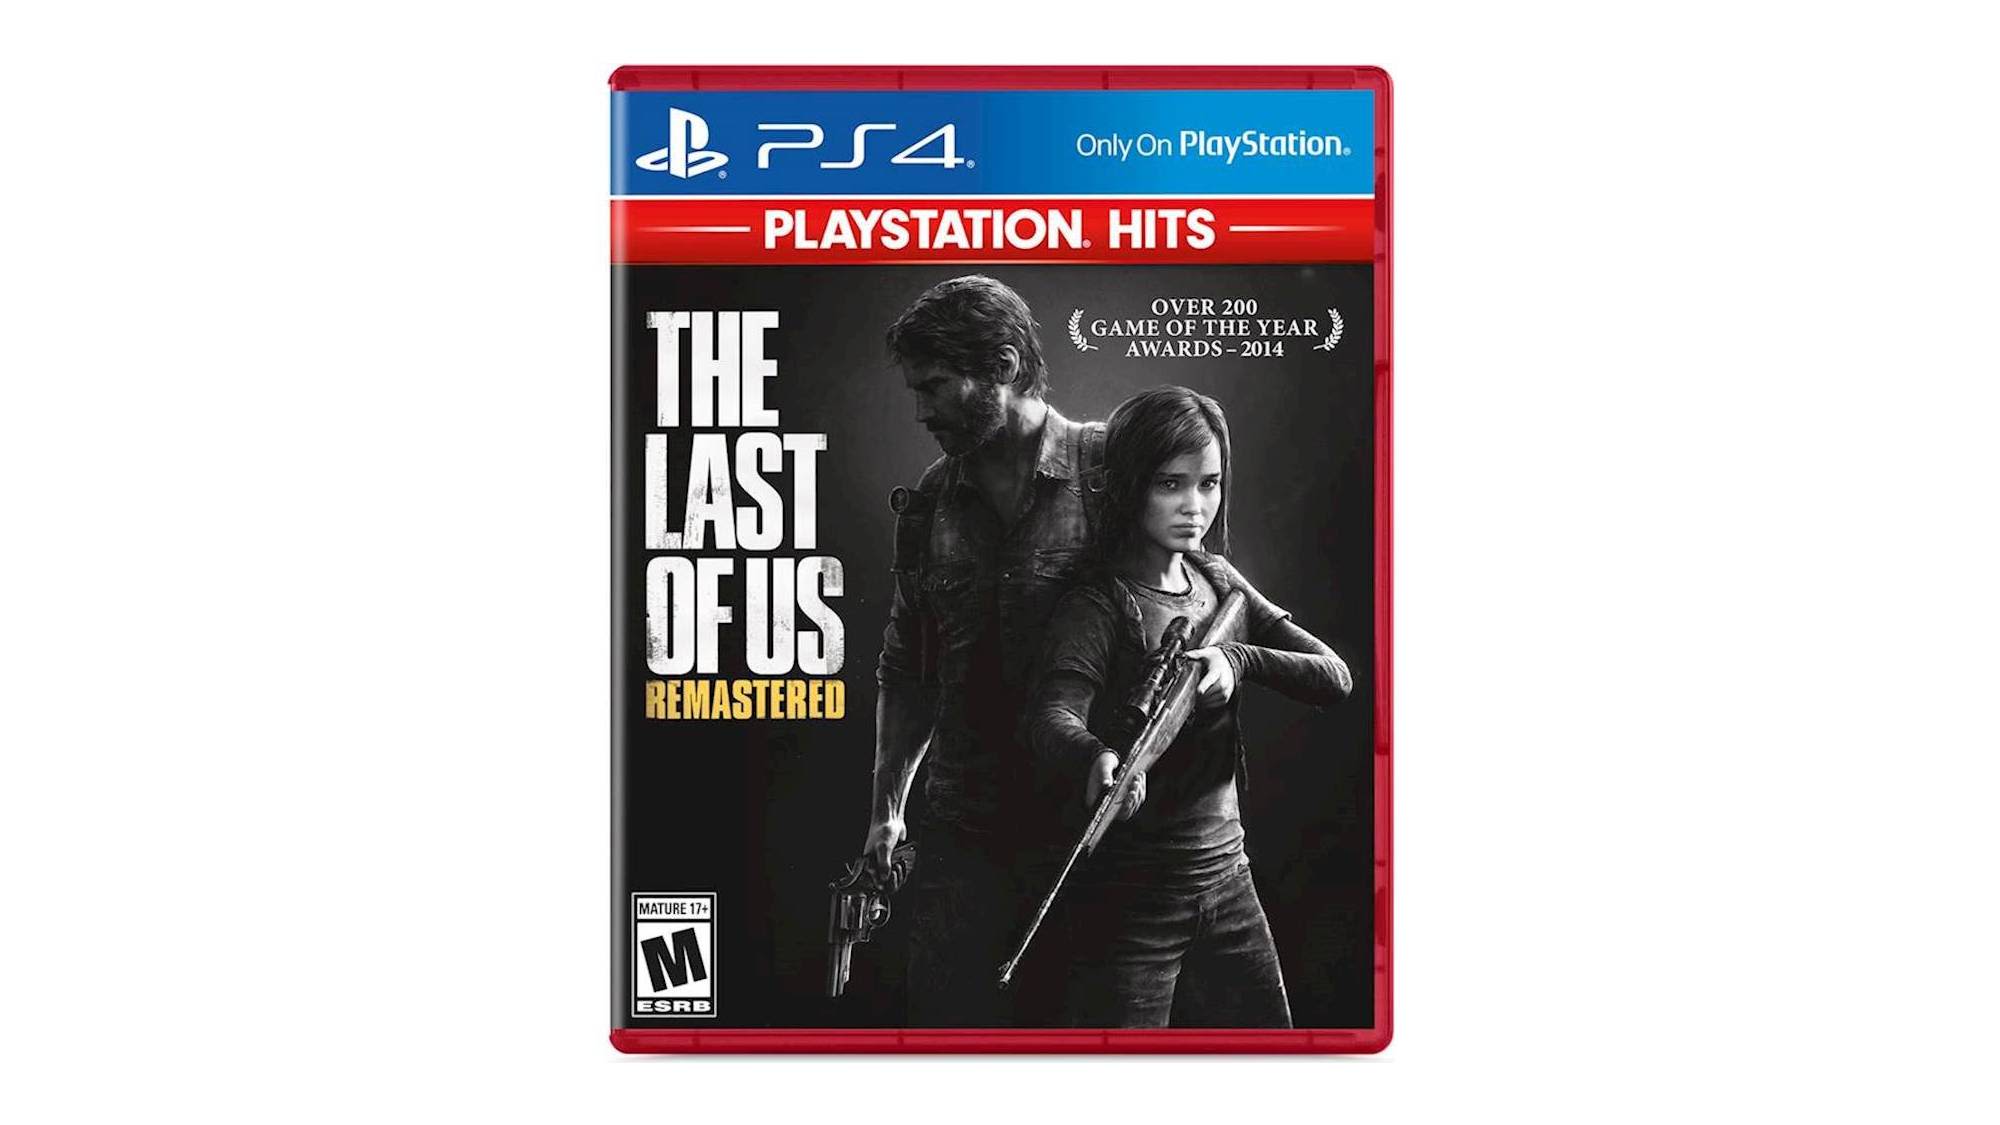 PS4 THE LAST OF US REMASTERED (US) [video game] : Video Games 